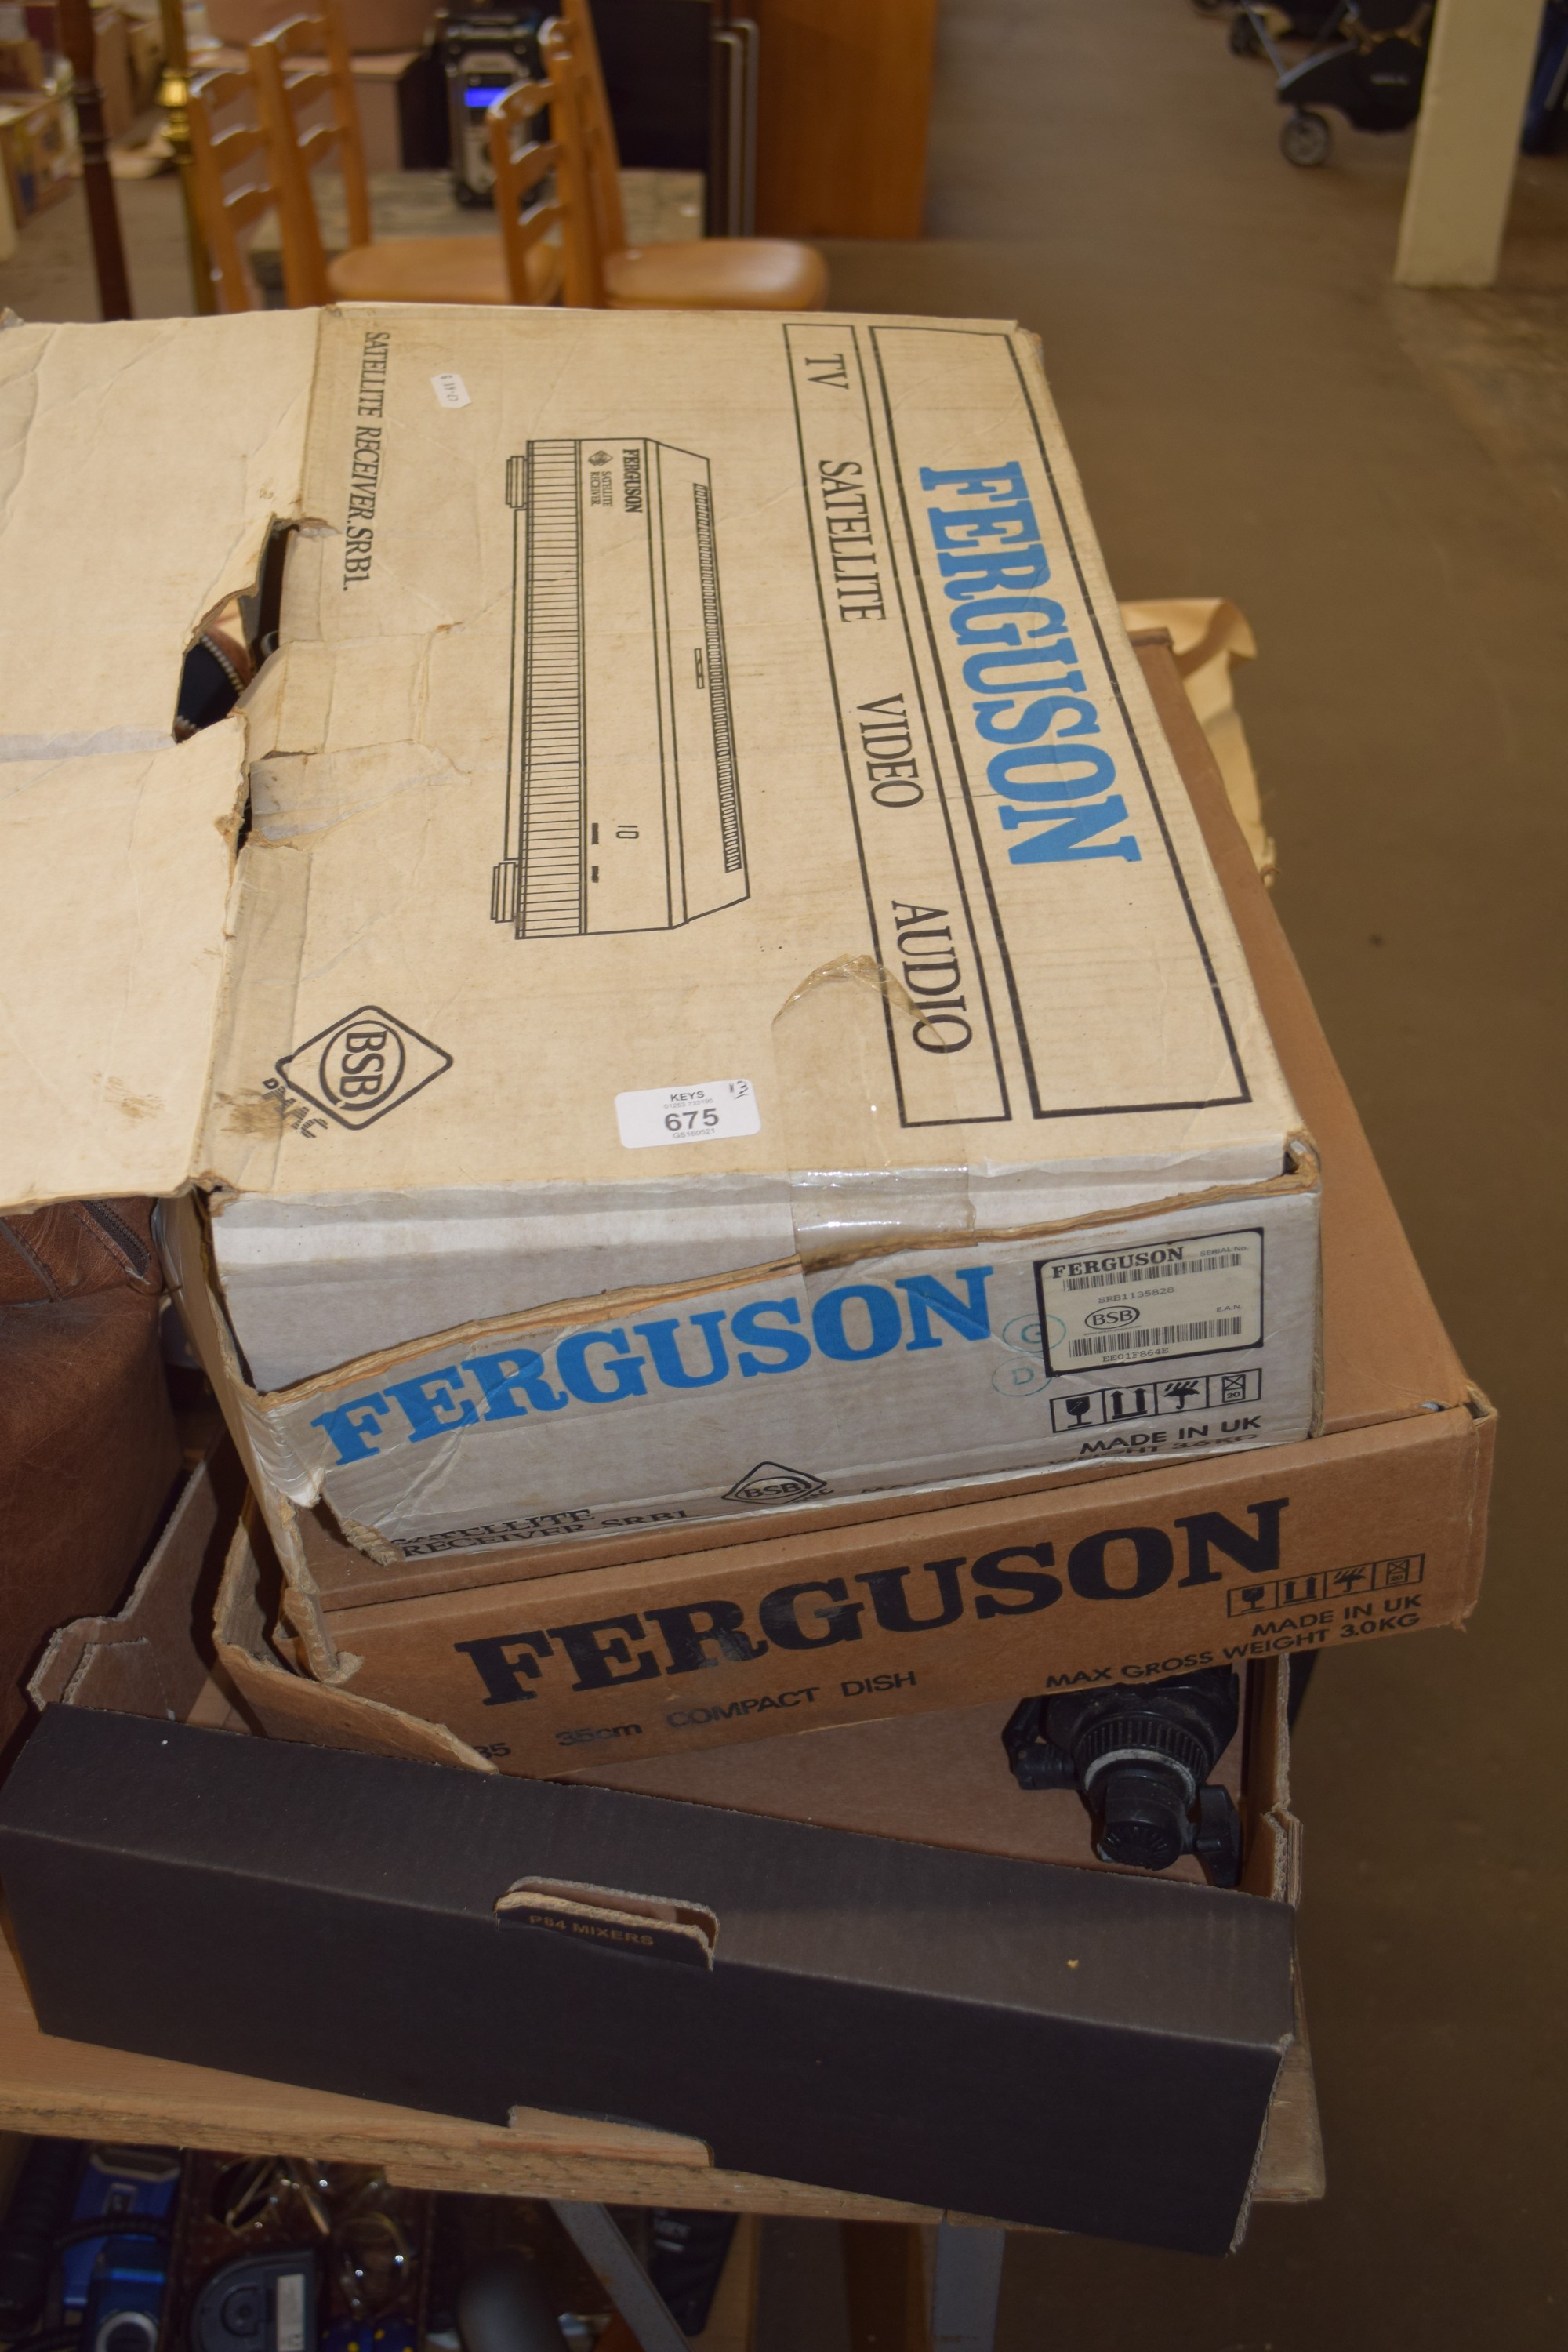 TRAY CONTAINING A FERGUSON SATELLITE VIDEO/AUDIO RECEIVER (BOXED), ANTENNA, 35CM COMPACT DISH, METAL